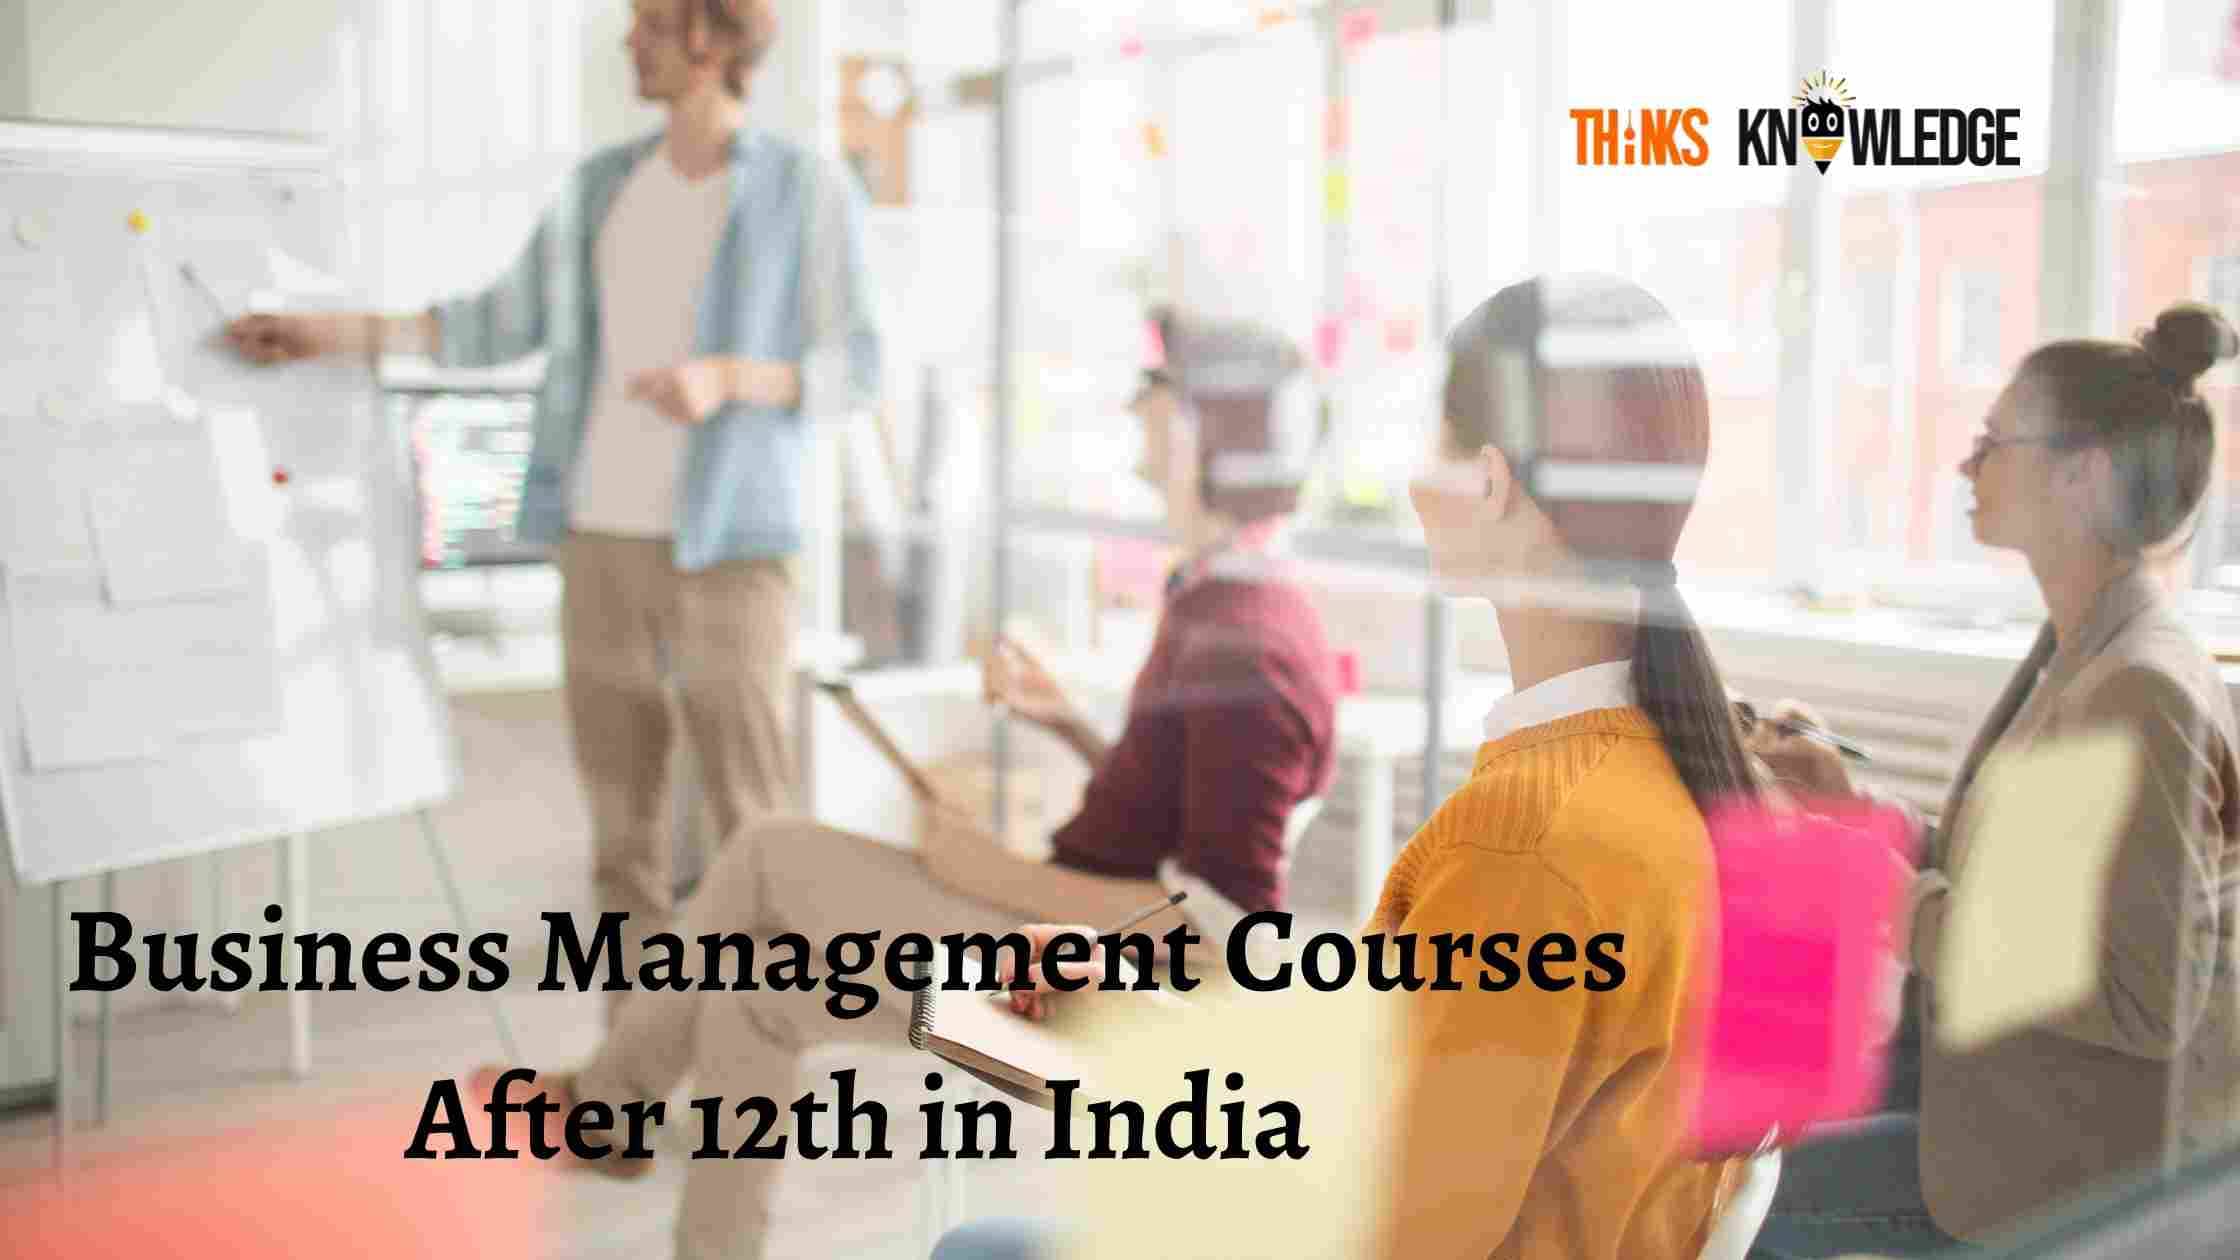 Business Management Courses After 12th in India